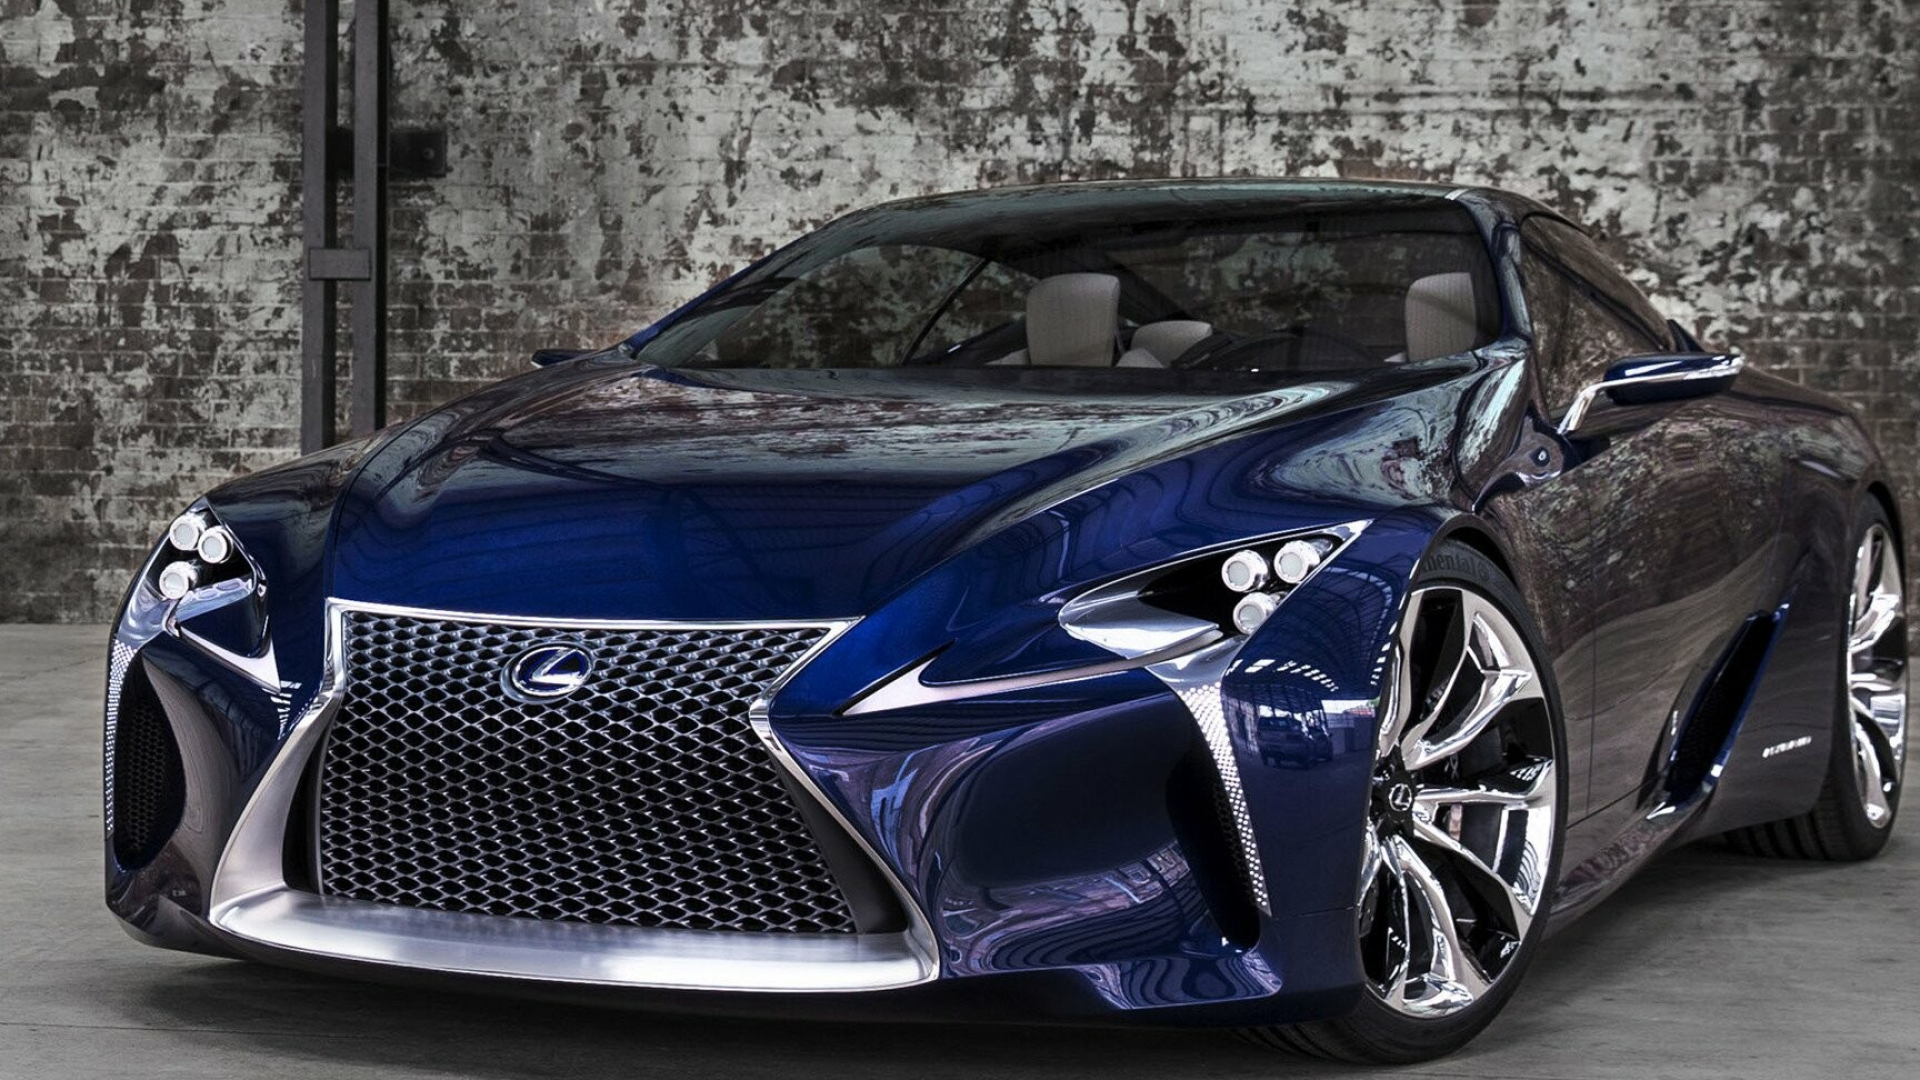 Lexus: Japanese automaker, Makes numerous hybrid vehicles, including hybrid versions of the NX, UX, and RX. 1920x1080 Full HD Background.